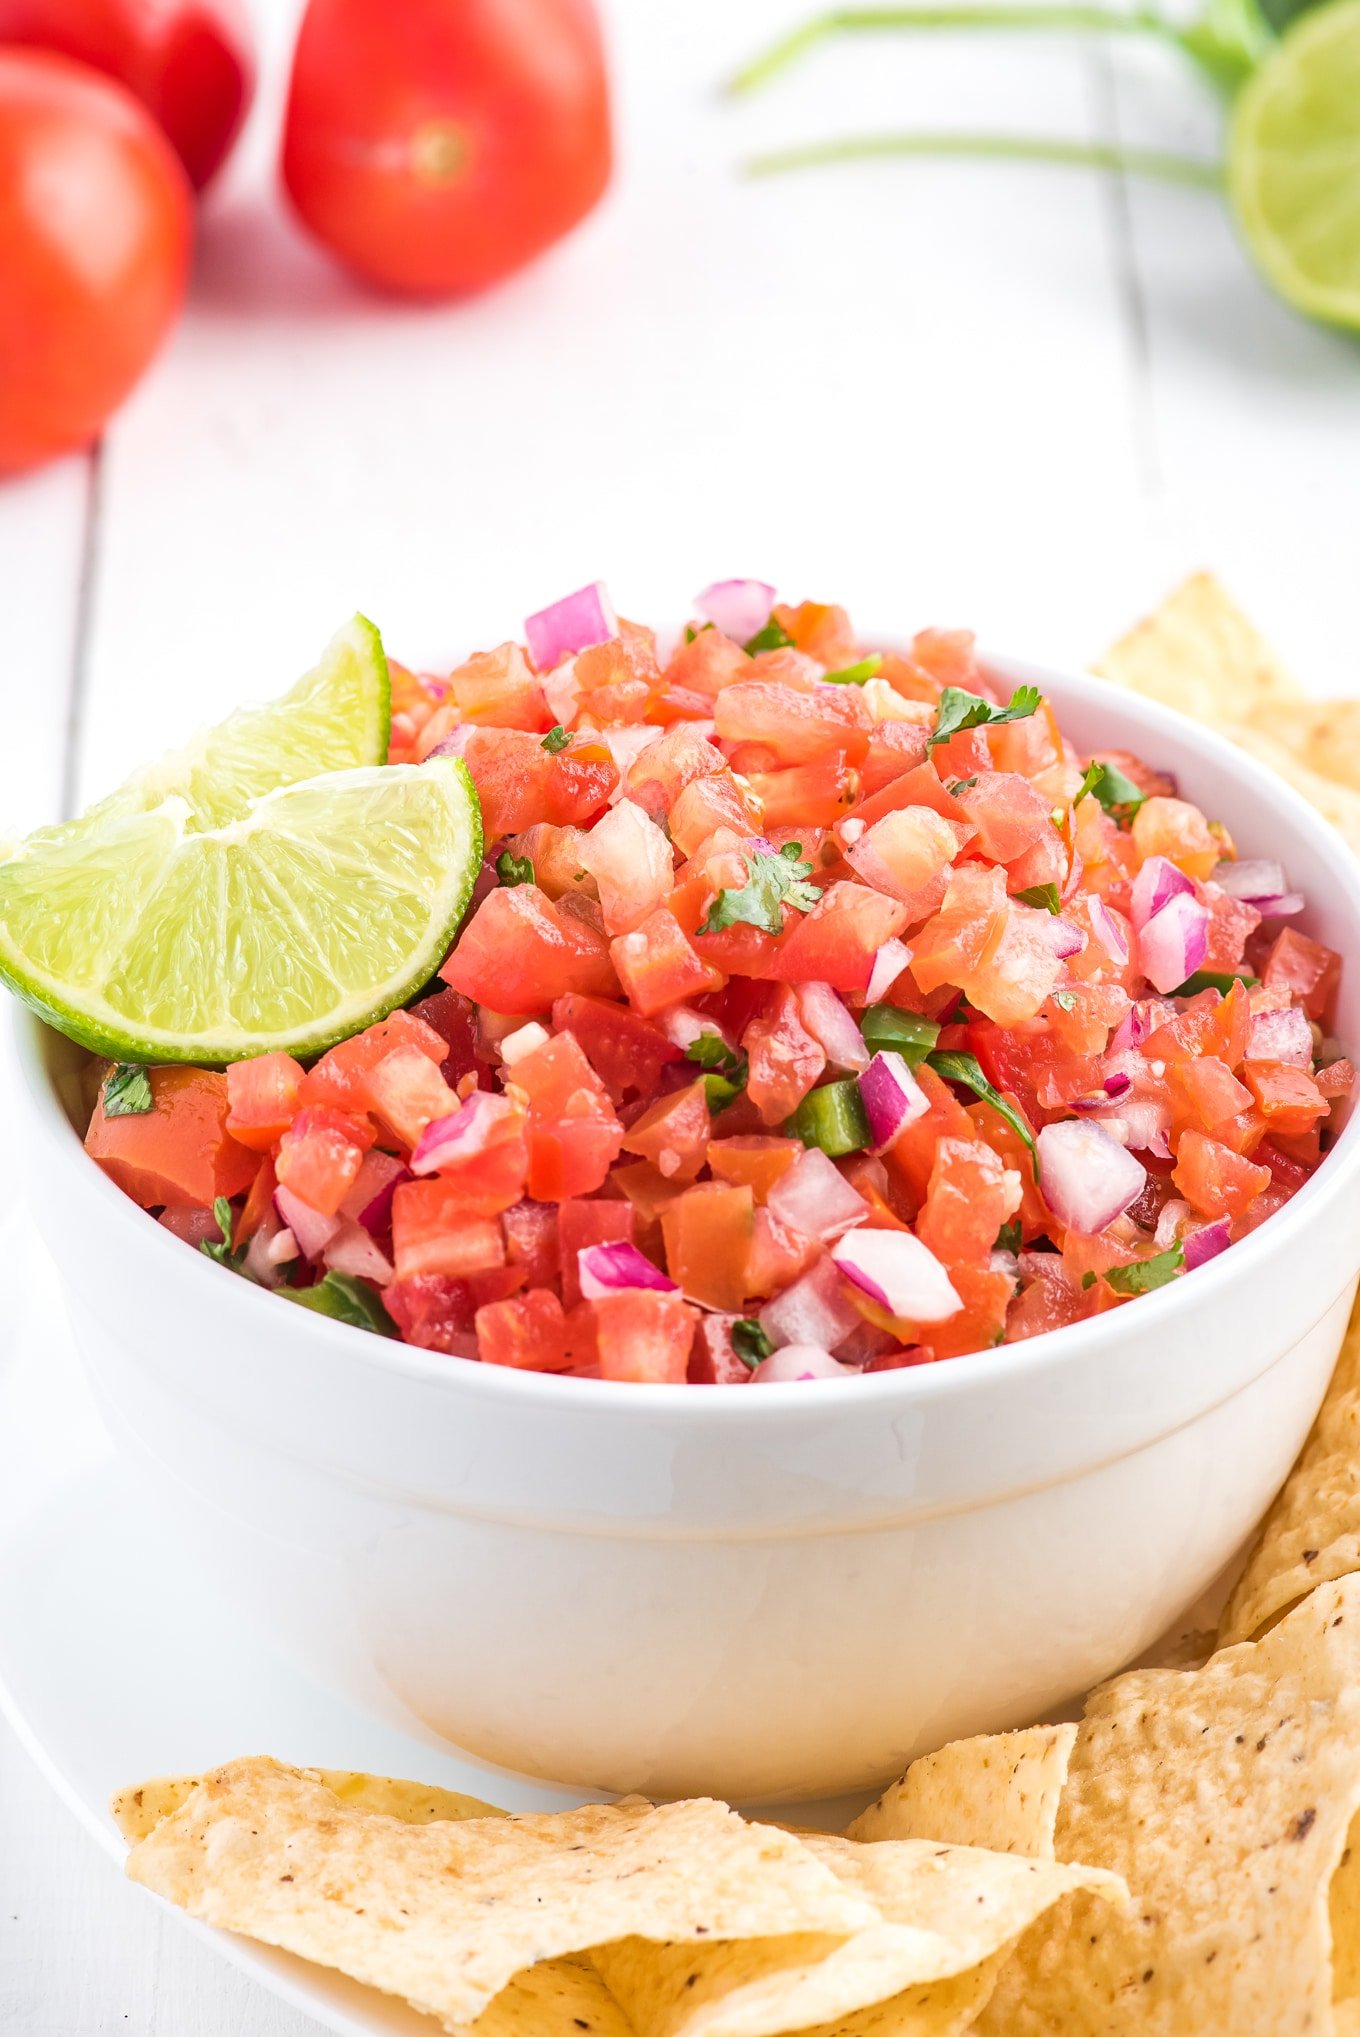 Pico de gallo in a bowl with a lime wedge for garnish.